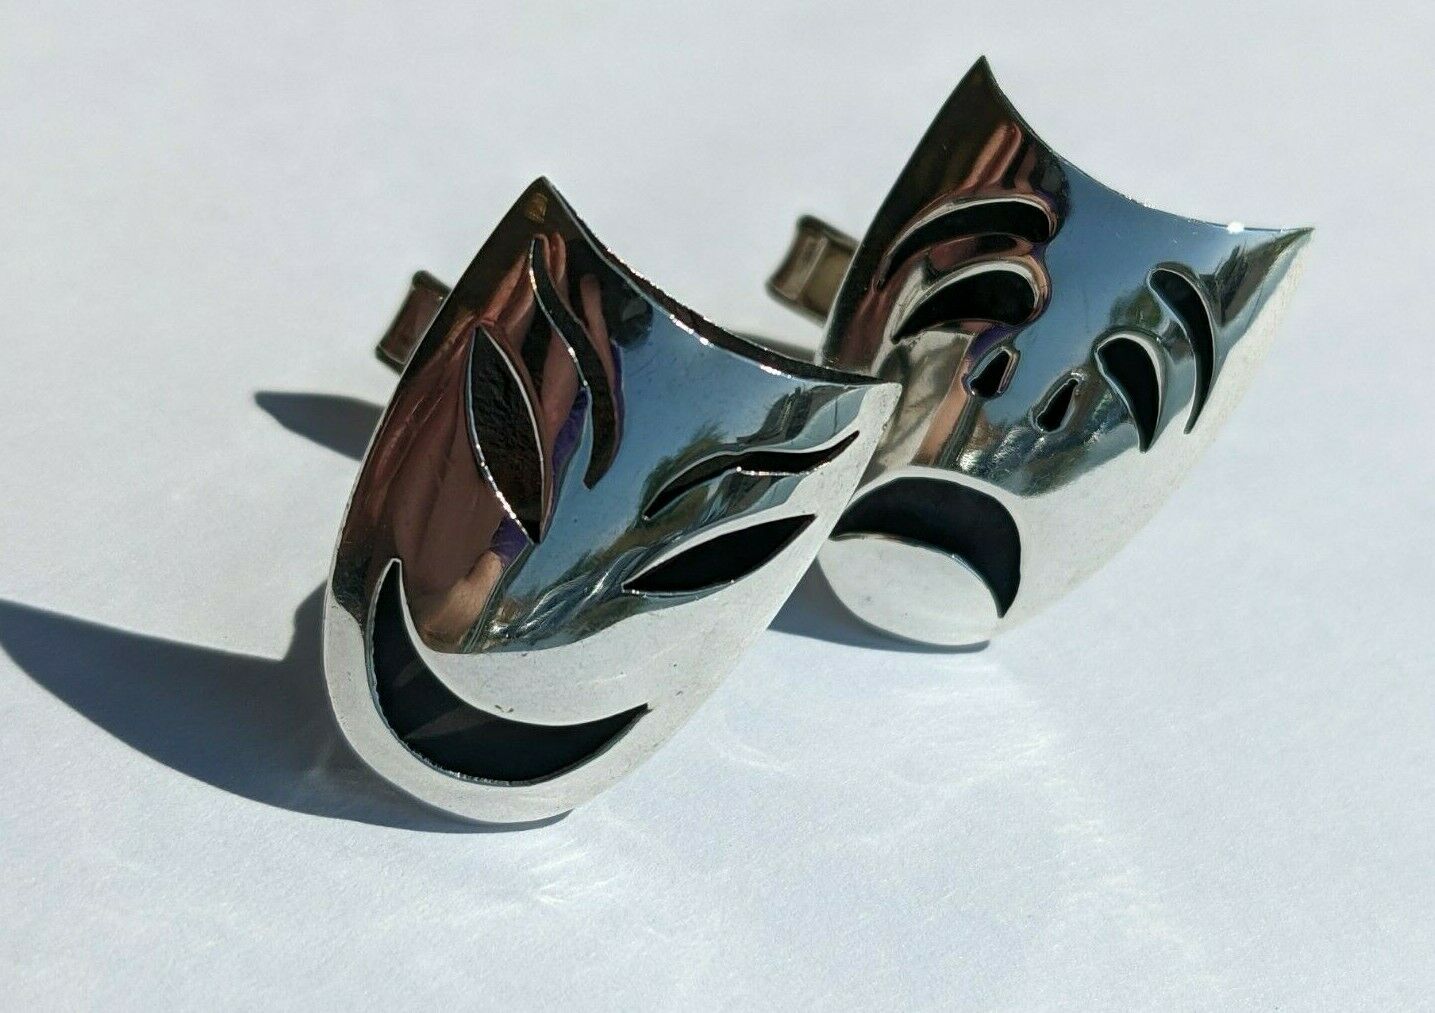 Vintage Taxco Sterling Silver Comedy Tragedy Cufflinks